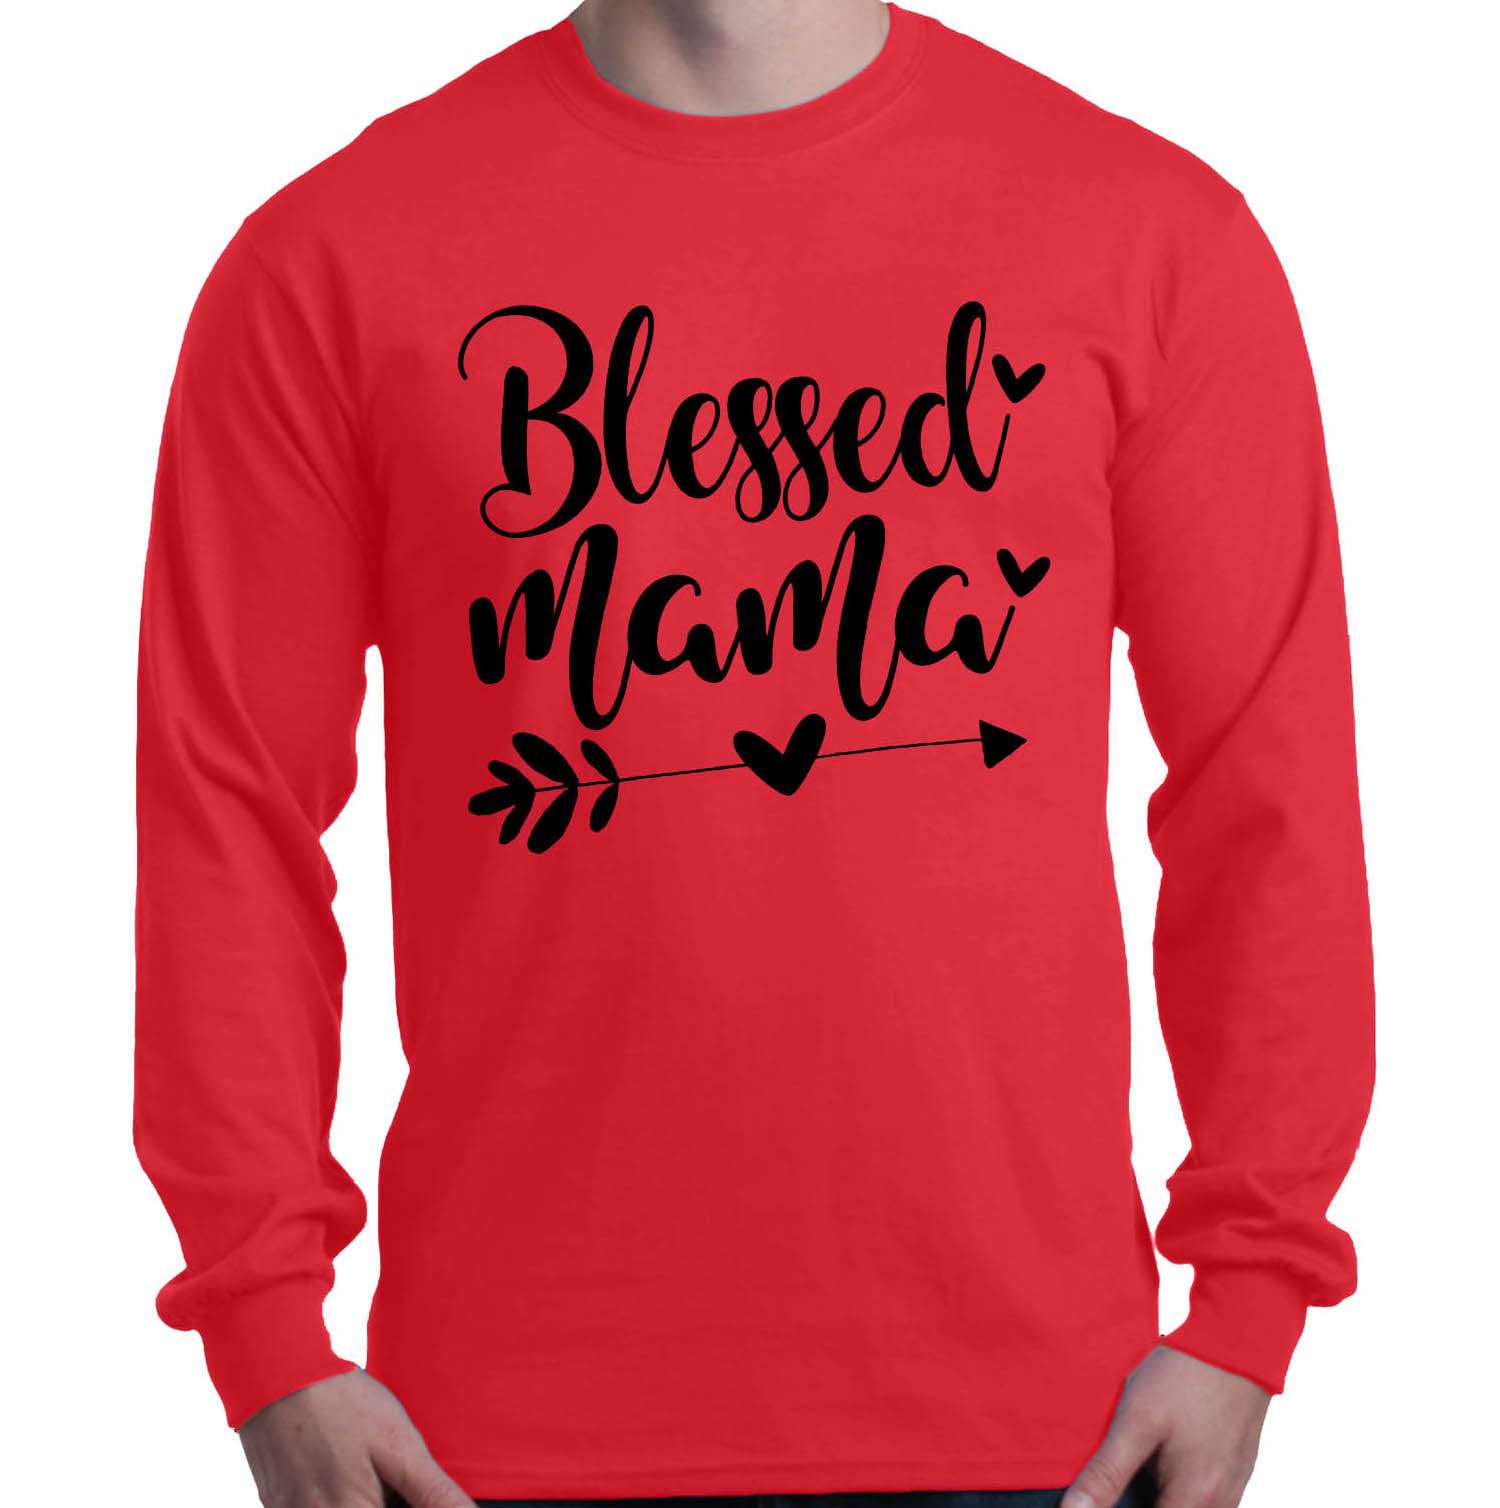 mom sweater Jumper for mom Jumper for mama Blessed Mama jumper Mama apparel Blessed Mama sweatshirt Jumper for mum mama sweater.